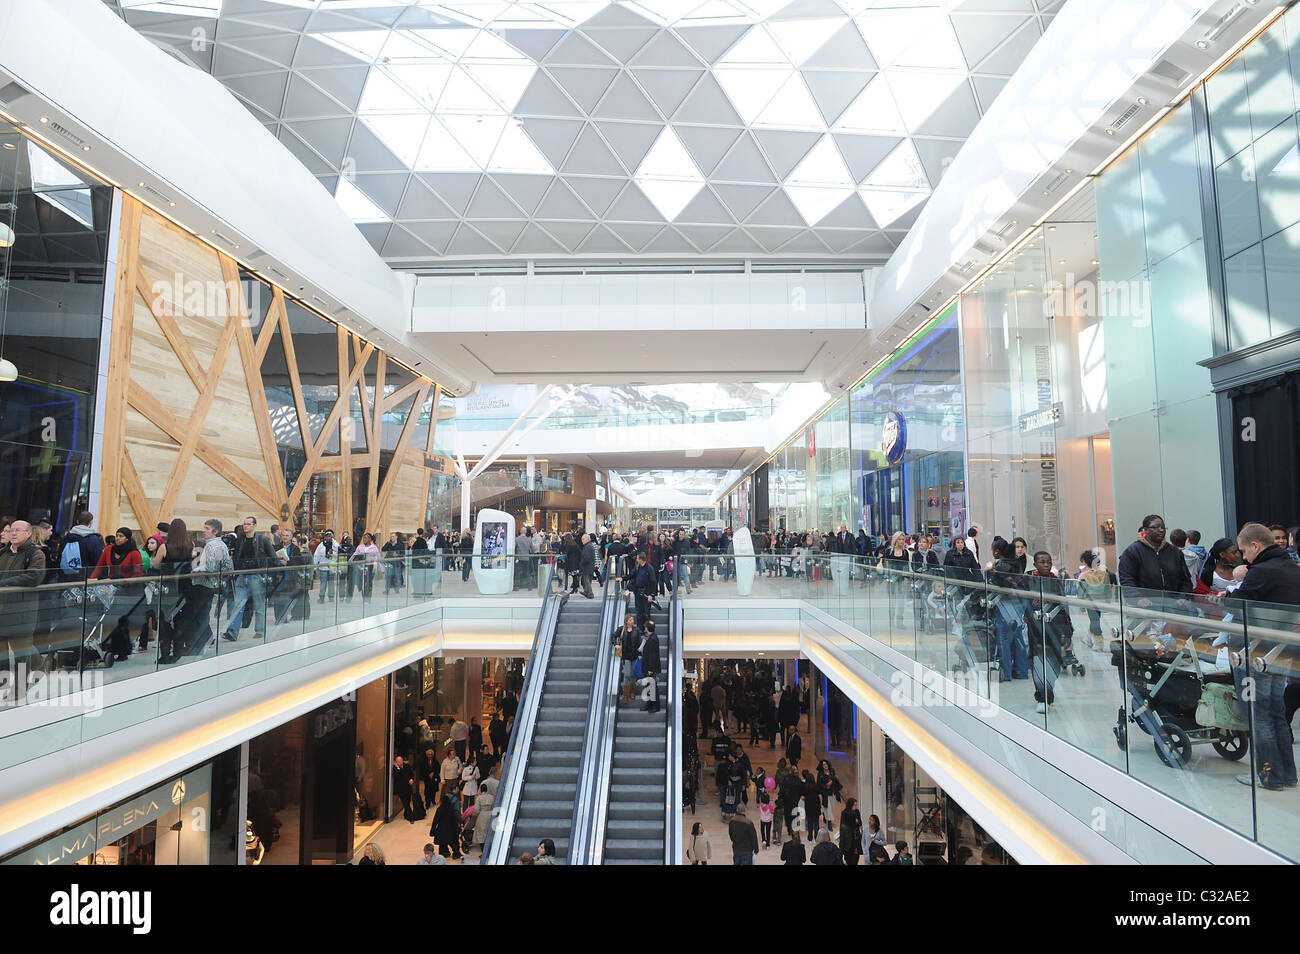 Westfield Shopping Centre, the largest urban shopping mall in